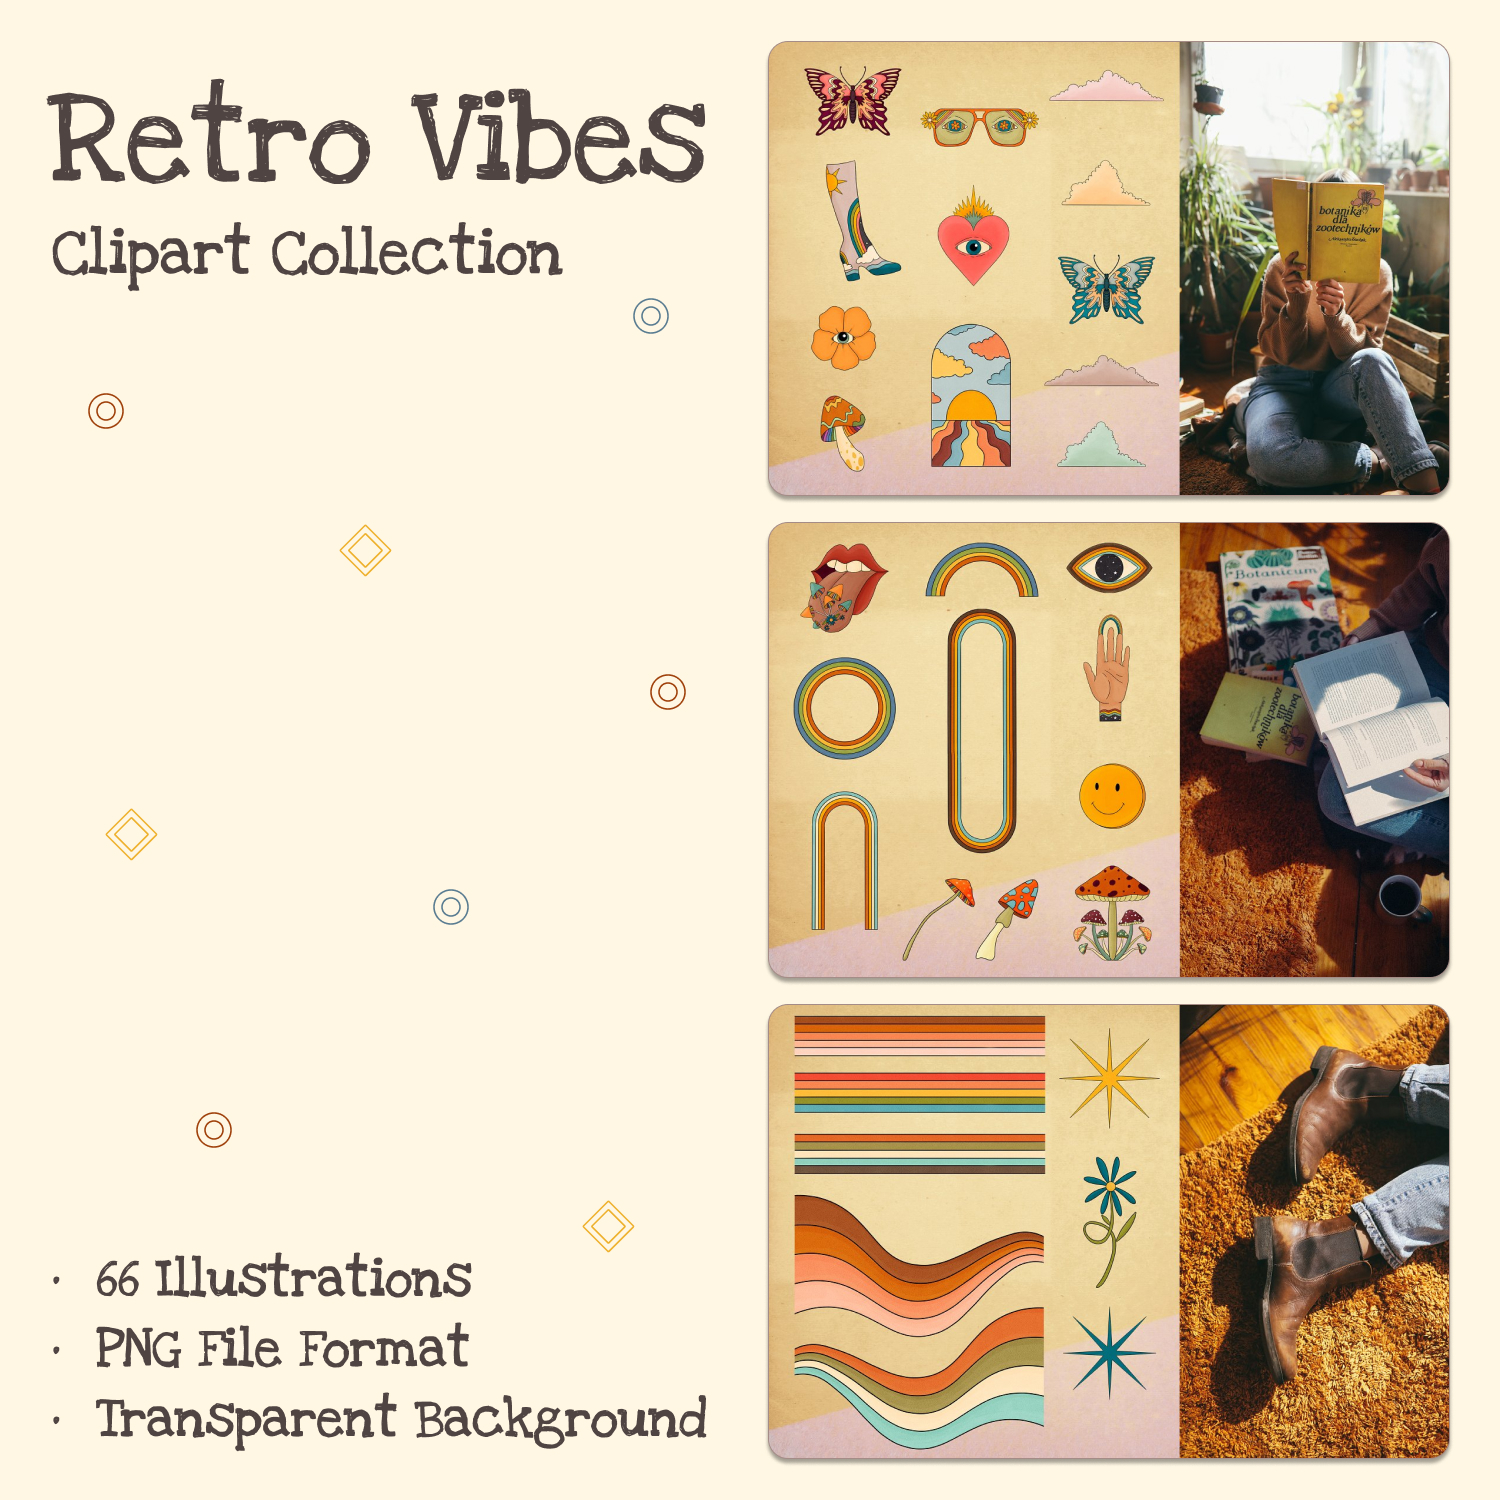 Prints of retro vibes clipart collection.